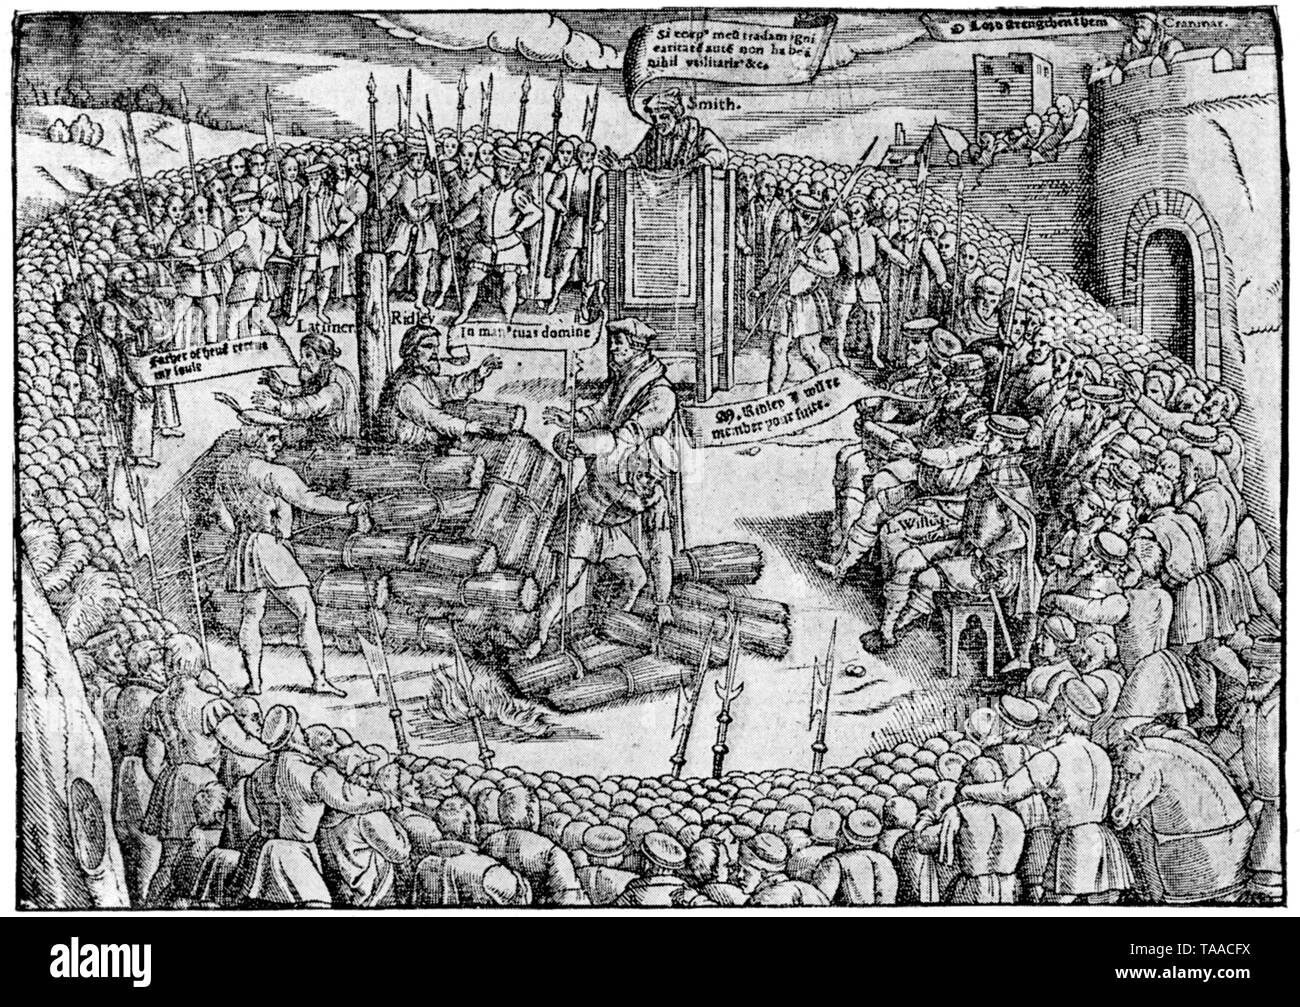 The Burning of Latimer and Ridley at Oxford, 16th October 1555. From John Foxe's 'Book of Martyrs' or 'Actes and Monuments', 1570. Hugh Latimer (c1487-1555) was the pre Reformation Bishop of Worcester and later Church of England chaplain to King Edward VI. Nicholas Ridley (c1500-1555), was the Bishop of London. They were burnt at the stake and were two of the three Oxford Martyrs. Stock Photo